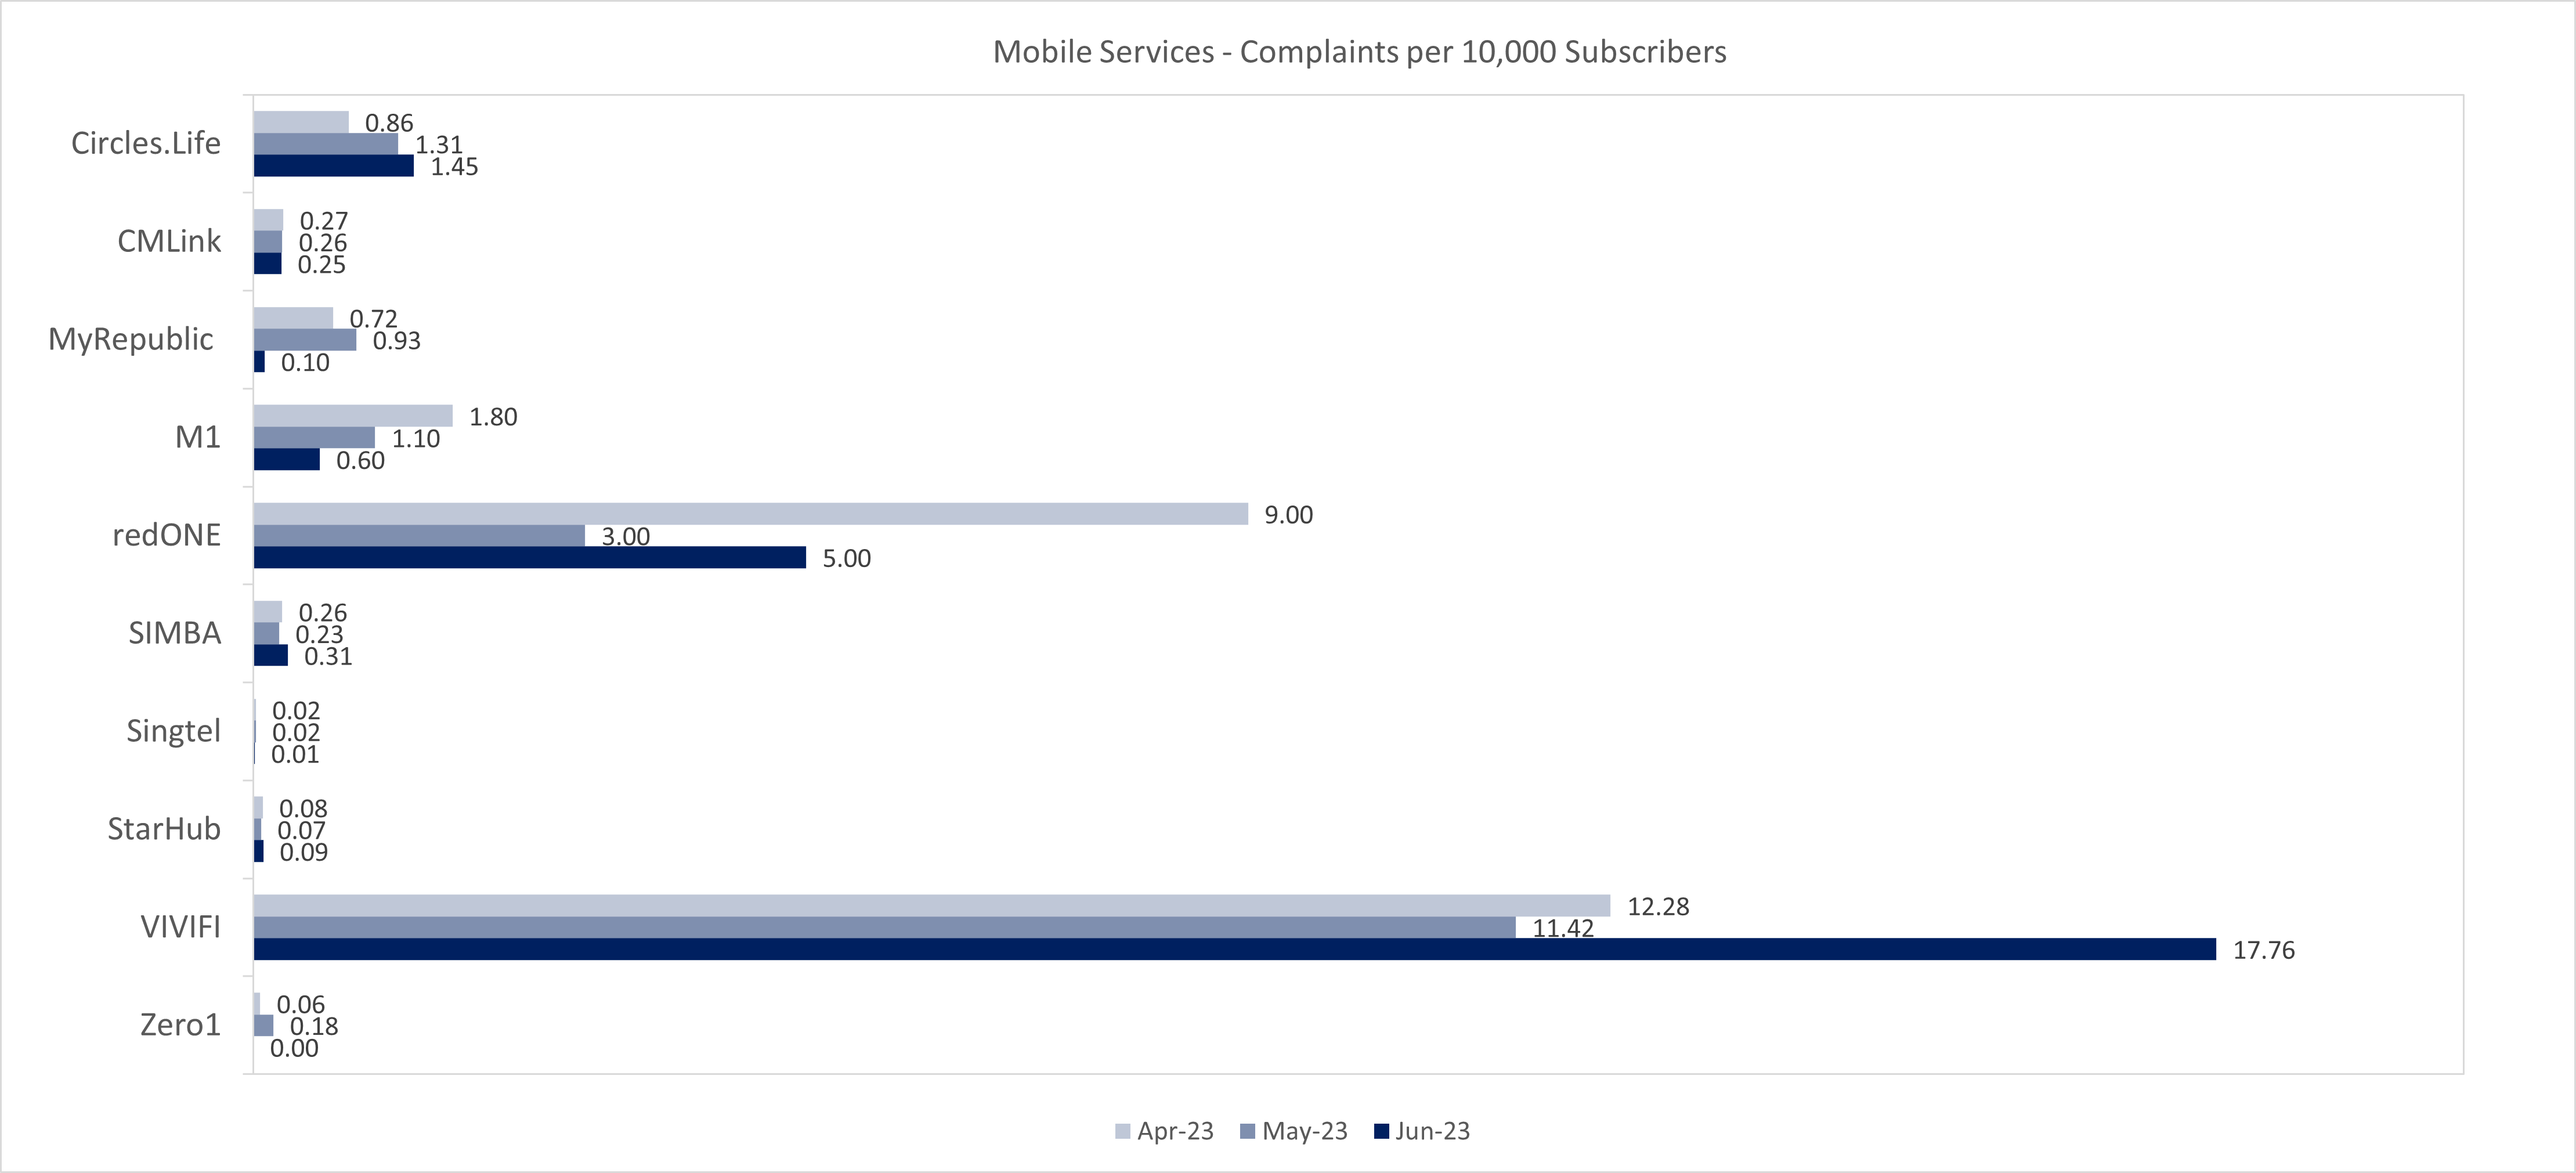 Mobile Services - Number of Complaints per 10000 subscribers